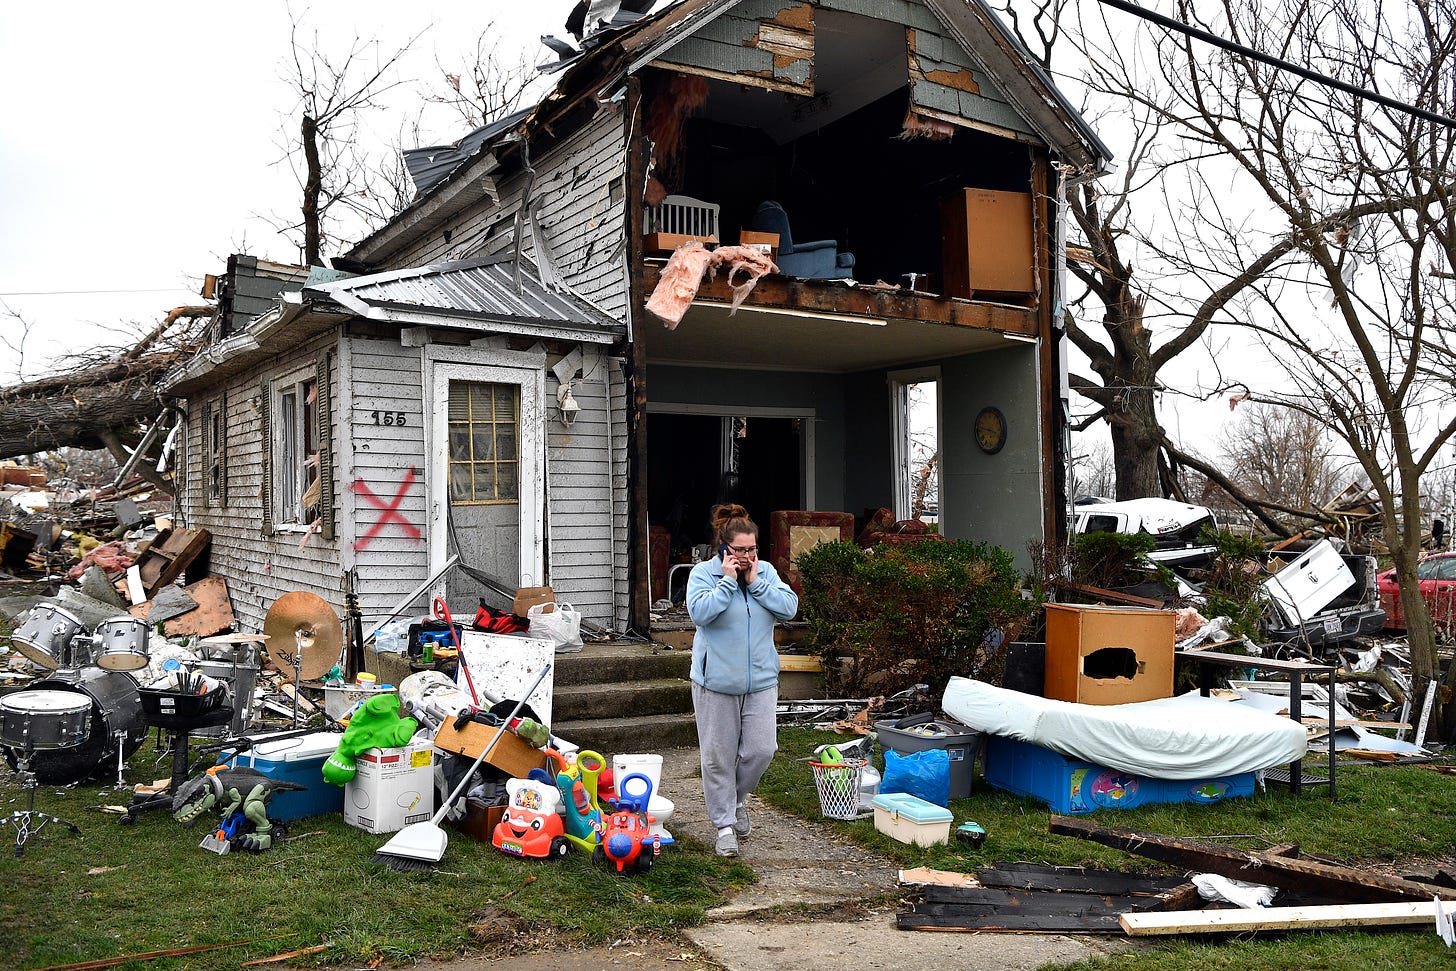 Brittany Oakley checks in with relatives outside of what is left of her home in Lakeview, Ohio on Friday.